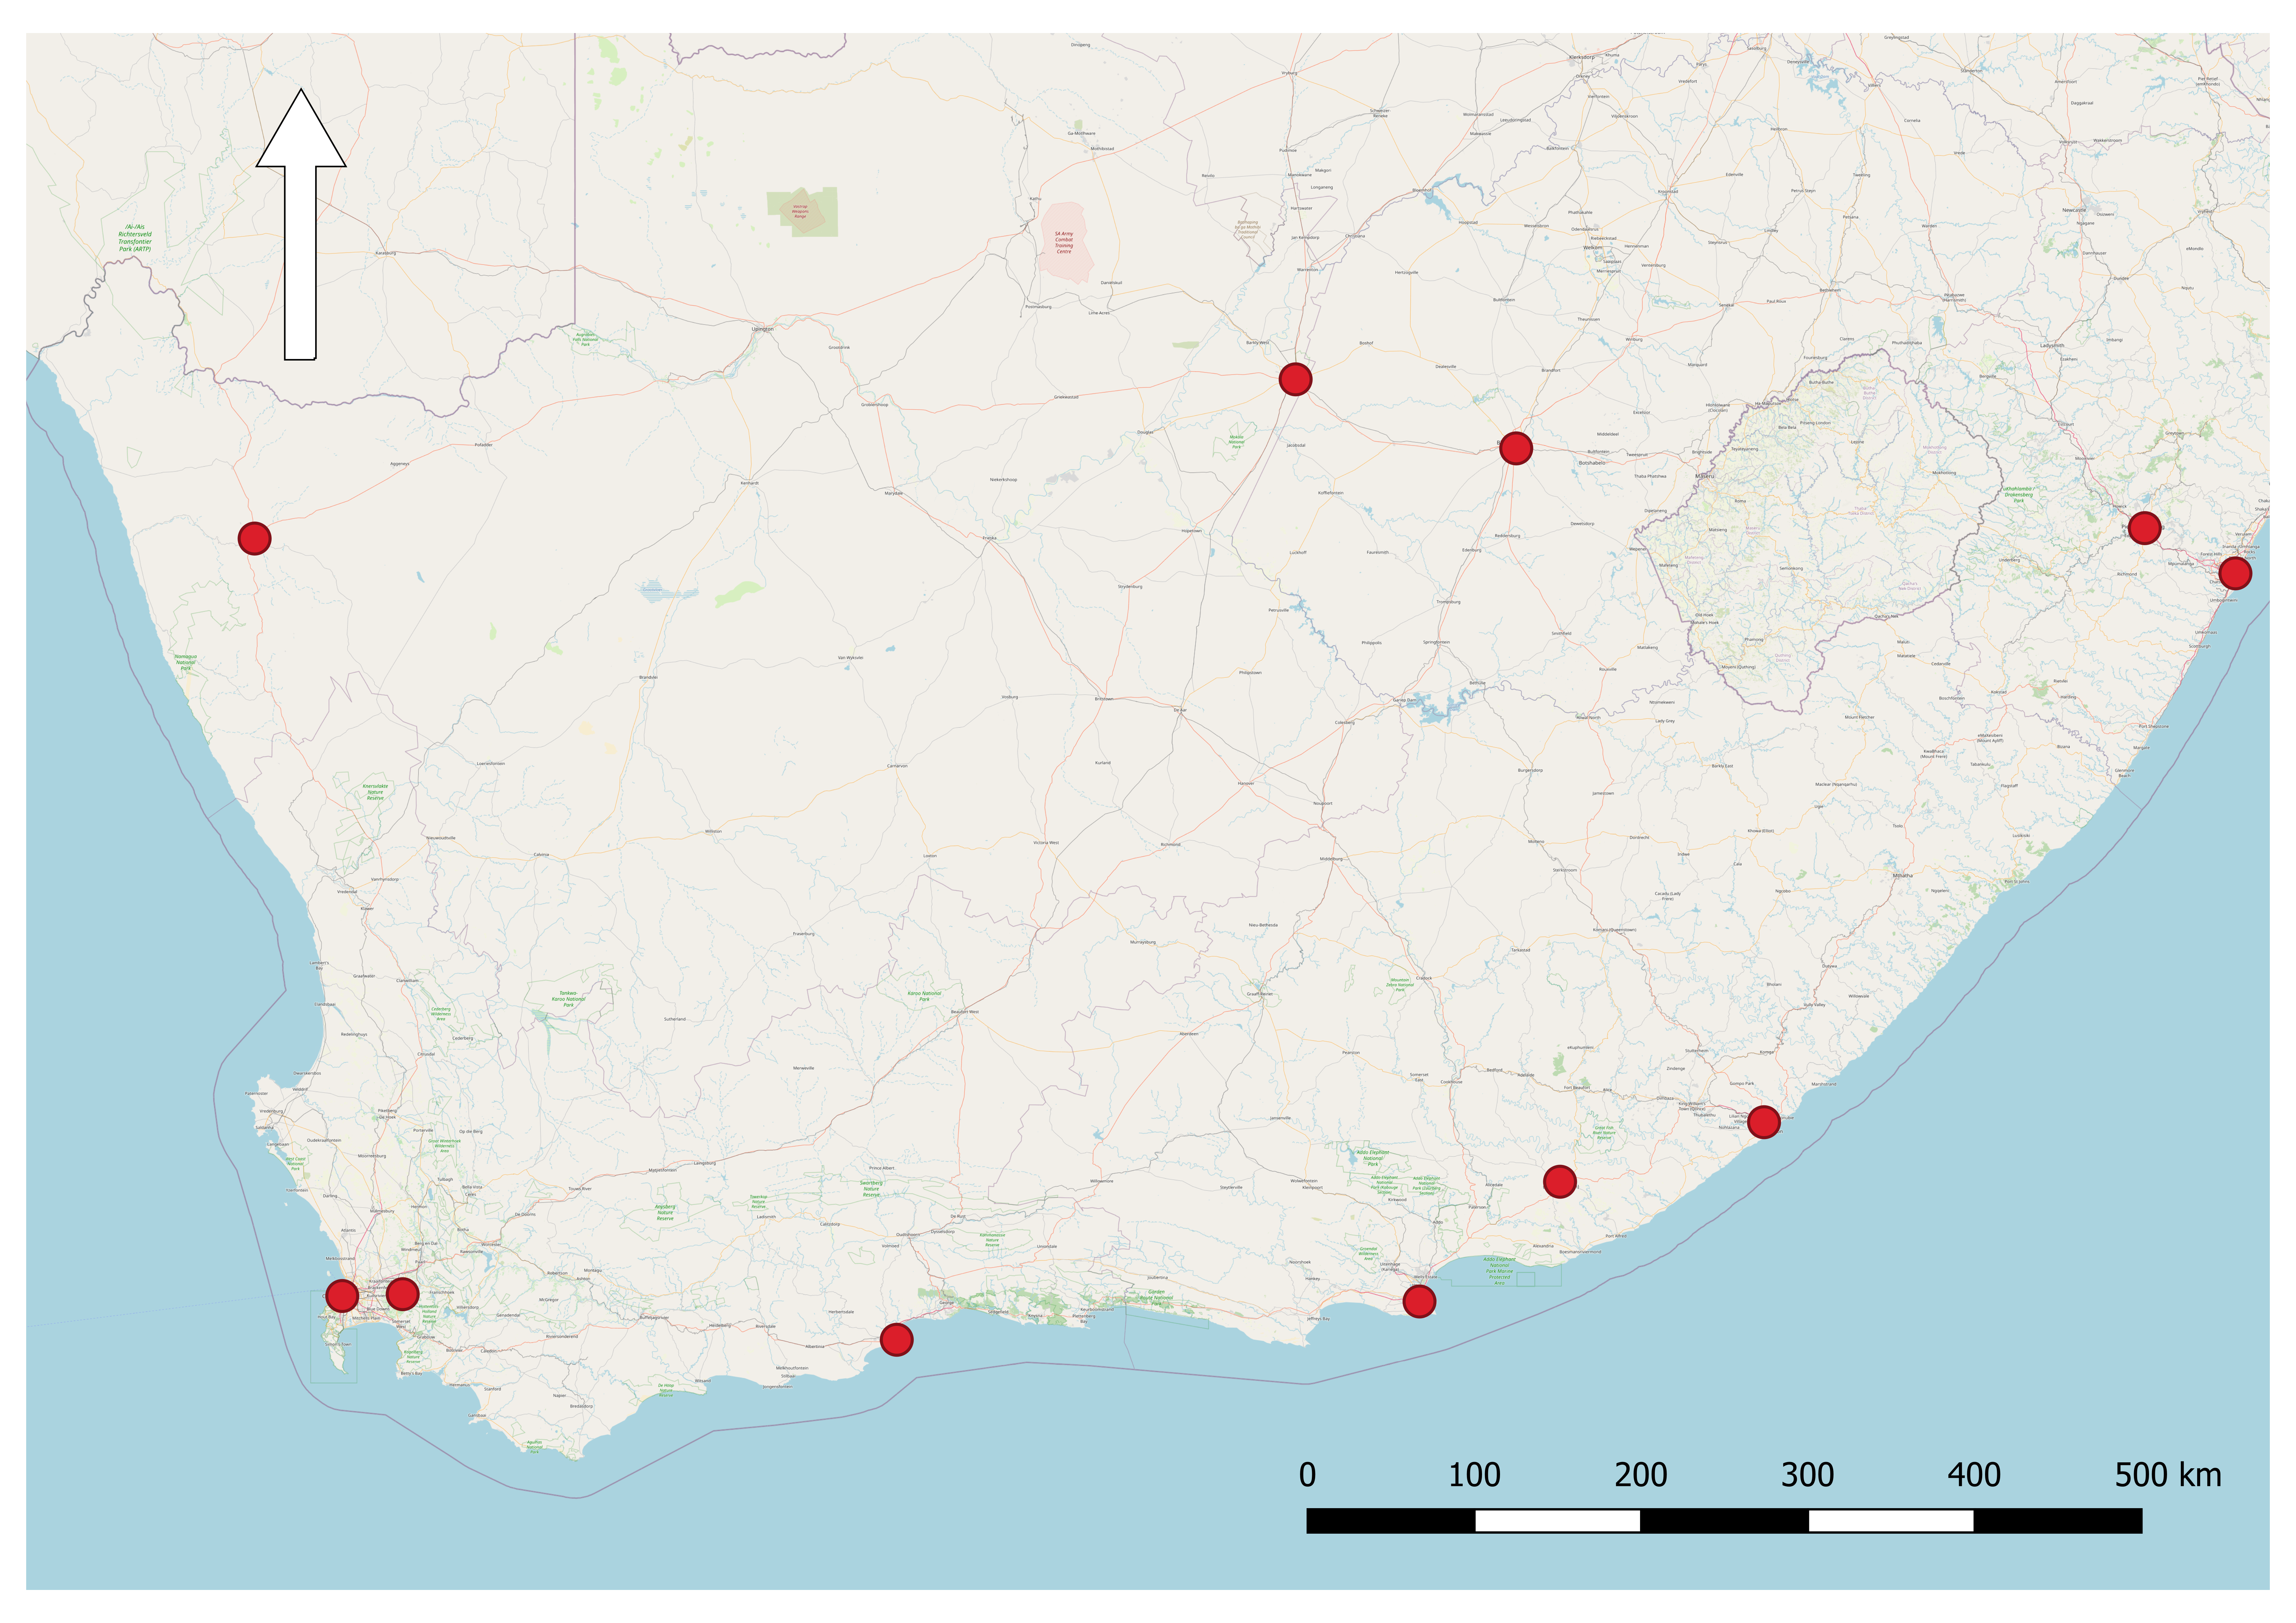 A plain map can give all the information needed. This map adequately shows the positions of sample sites (or anything else) as red points within the southern African region.